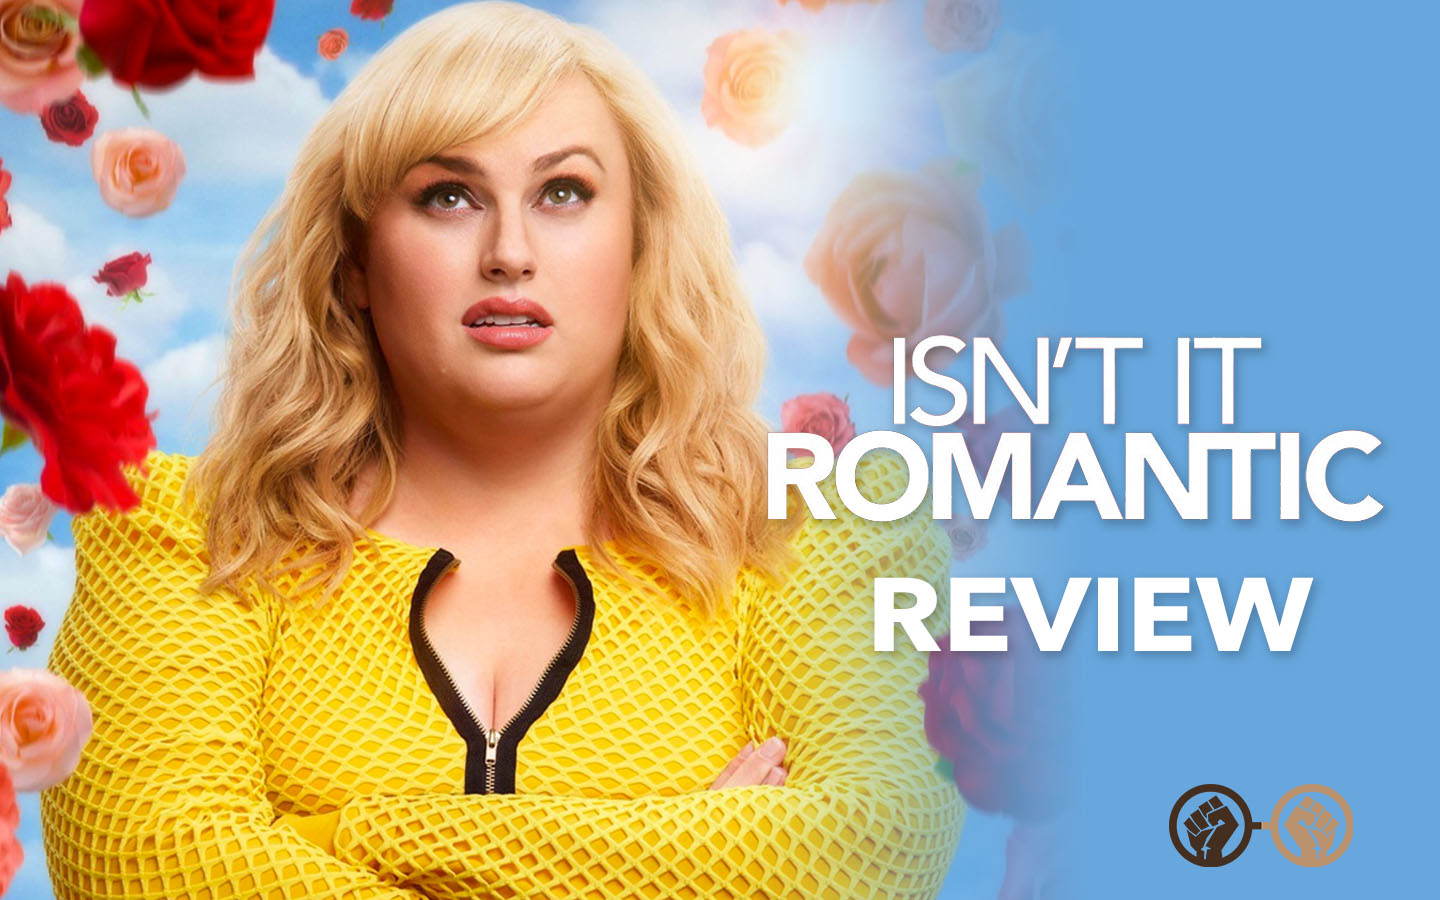 Although ‘Isn’t It Romantic’ Pokes Fun at Typical Rom-Com Tropes, it Still Falls Victim to Them – Review